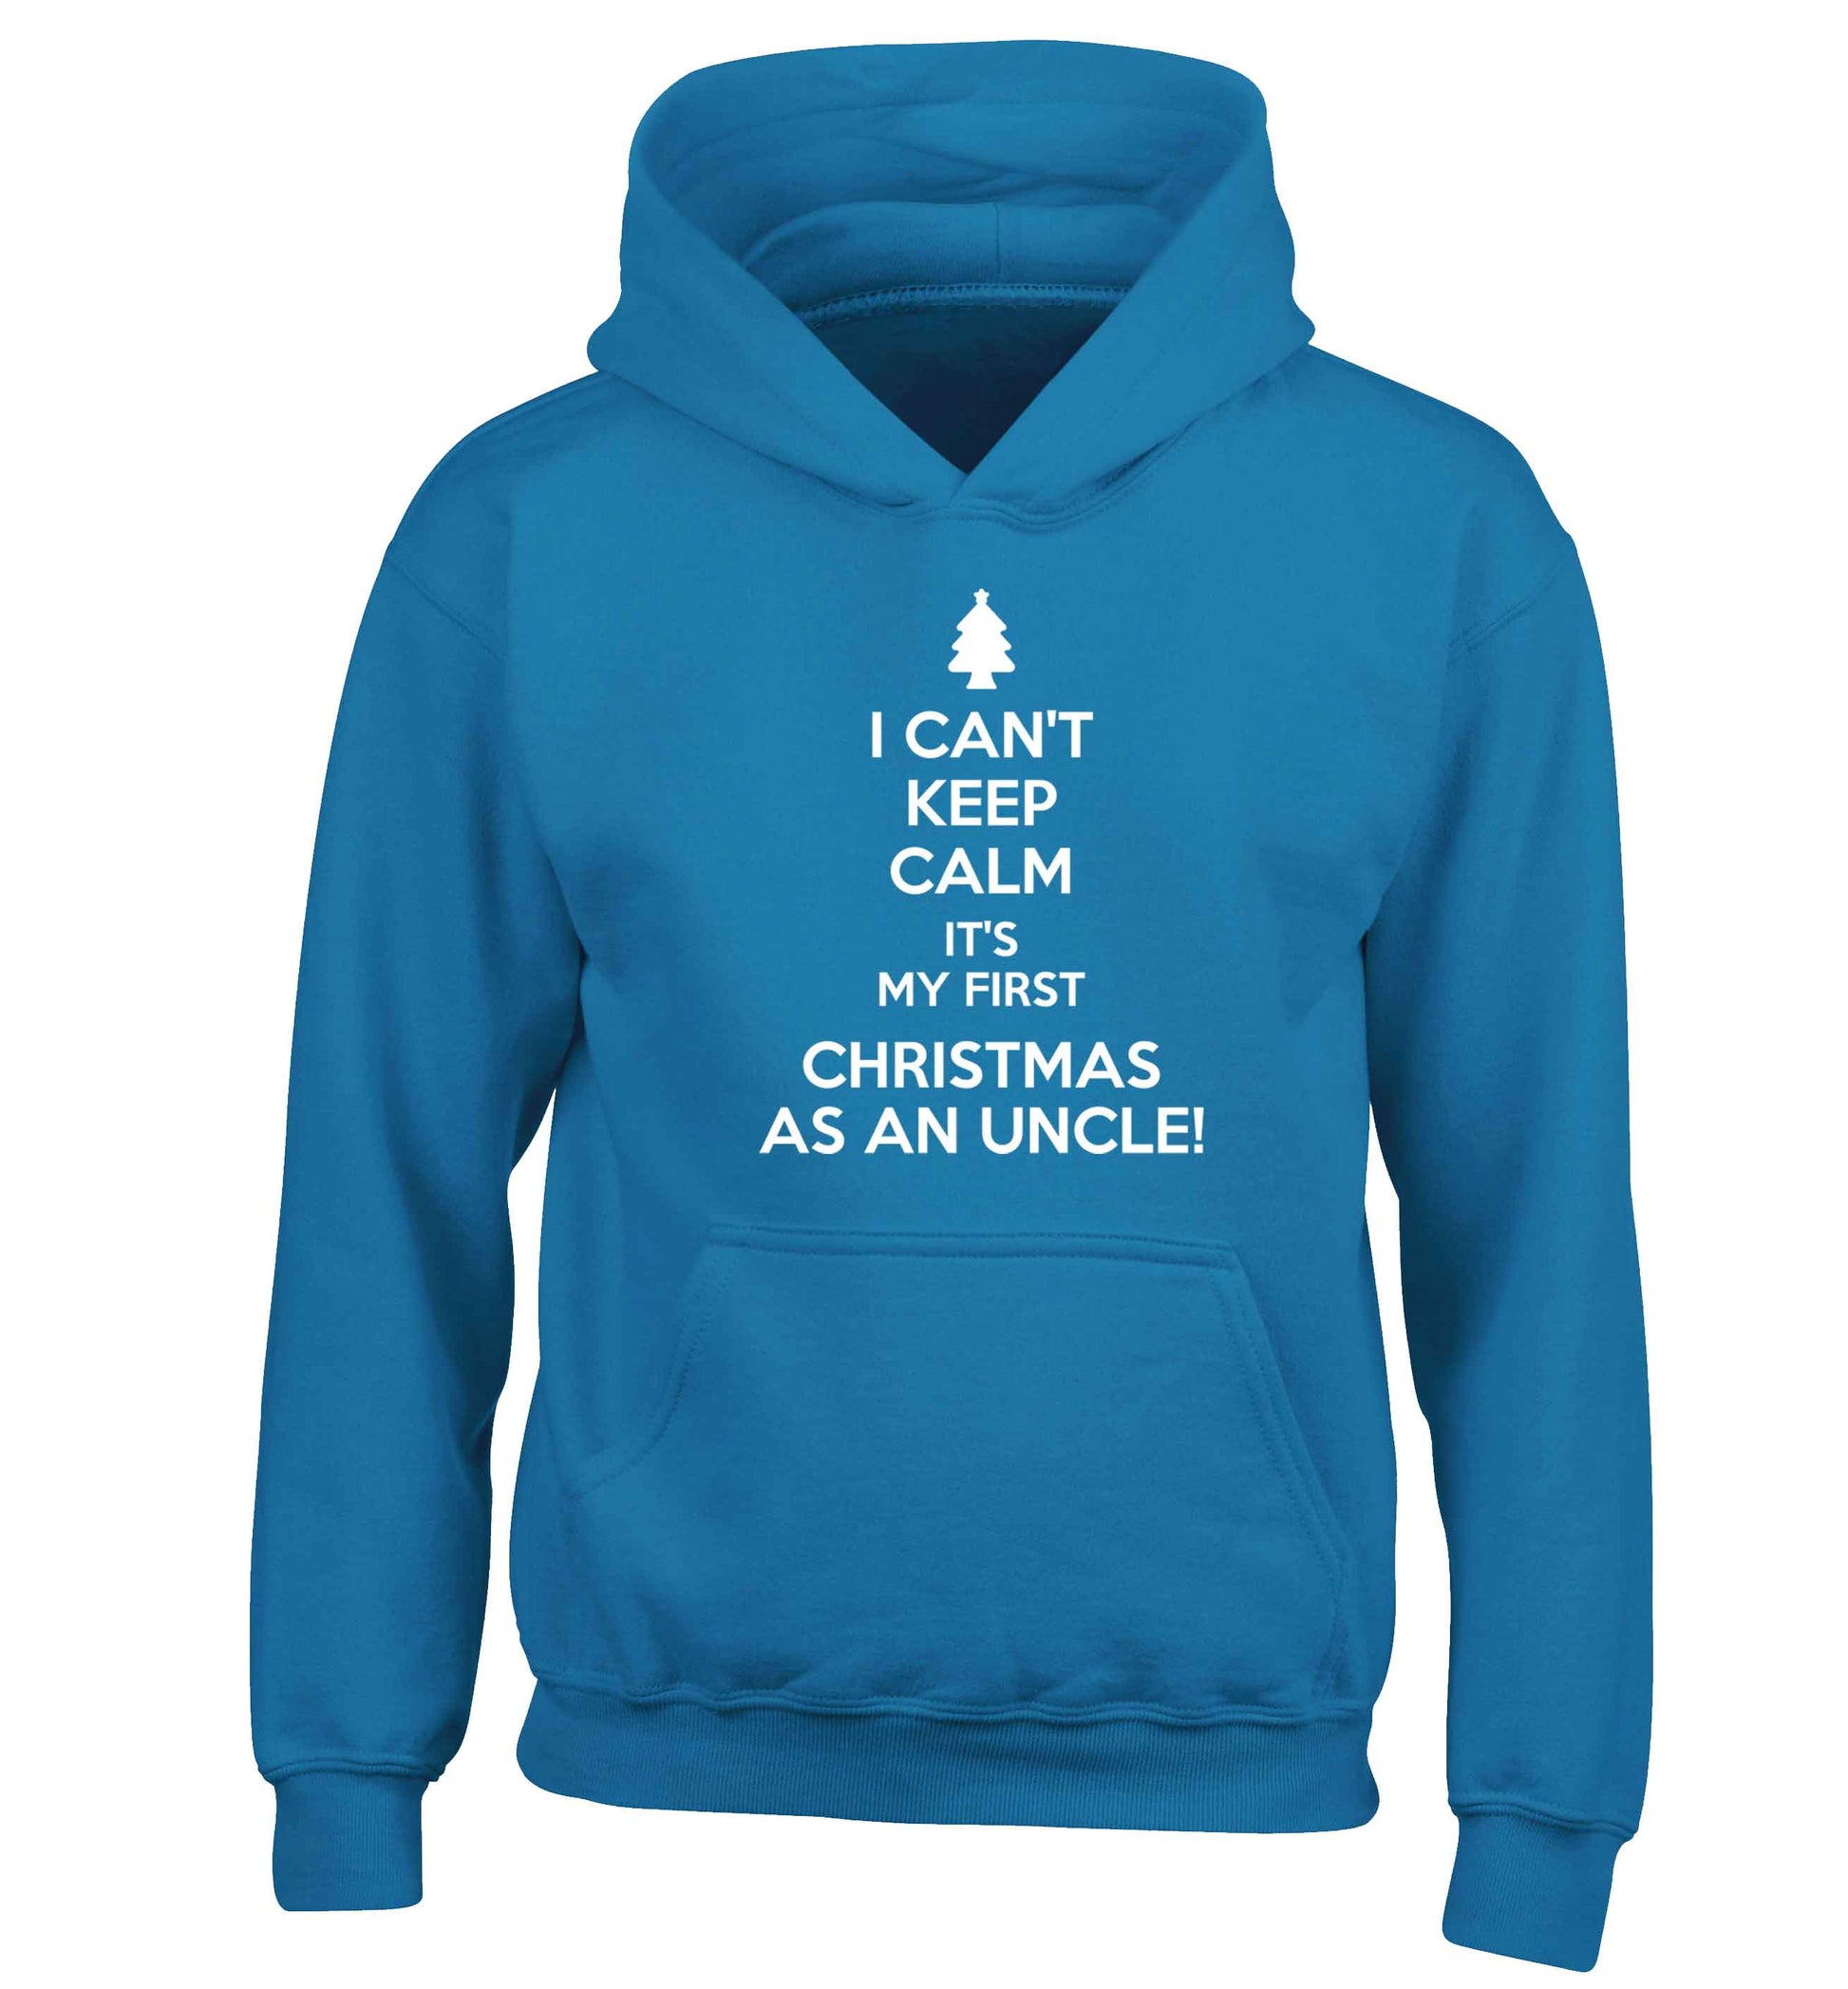 I can't keep calm it's my first Christmas as an uncle! children's blue hoodie 12-13 Years